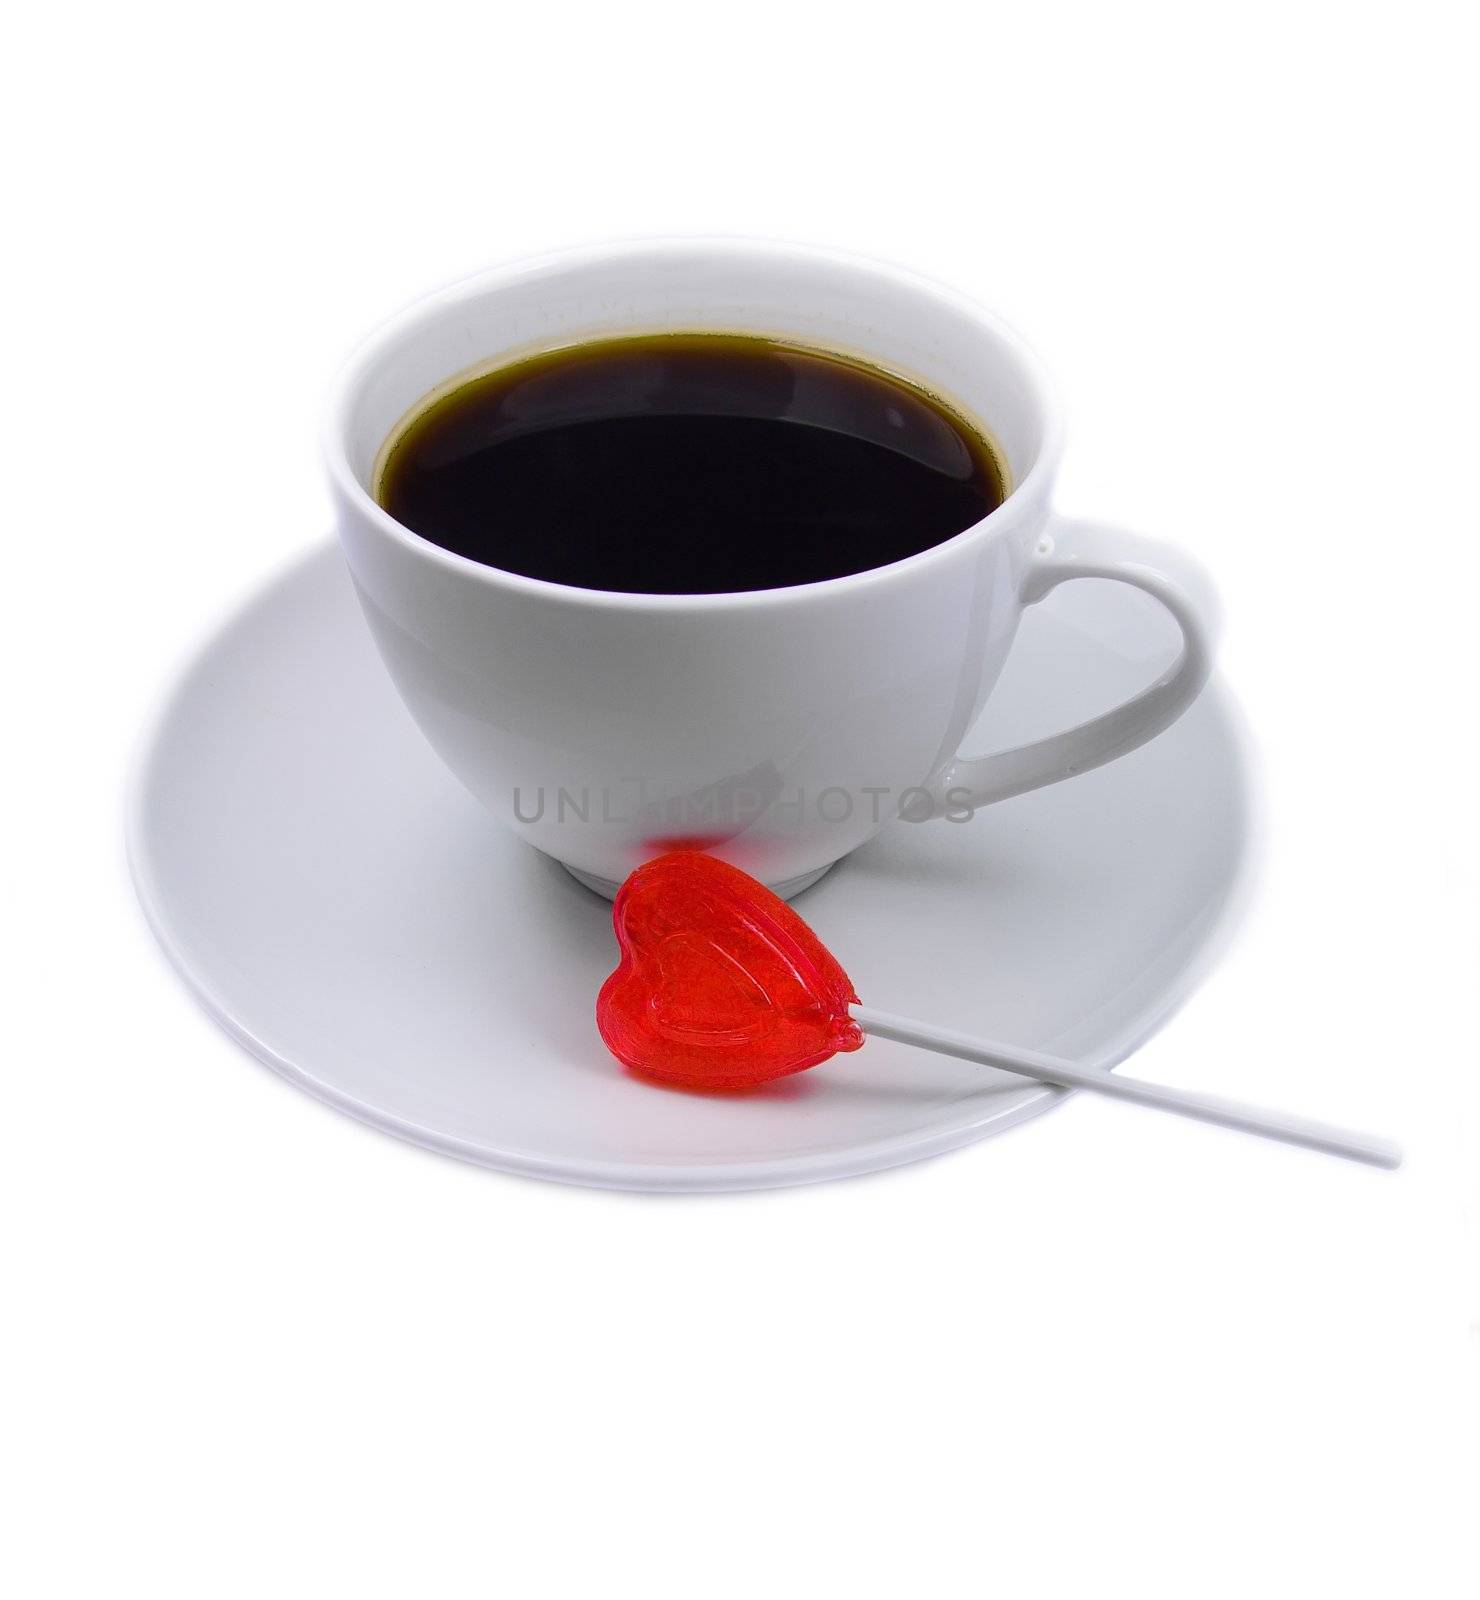 Black coffee cup with red lollypop heart for Valentine's Day.